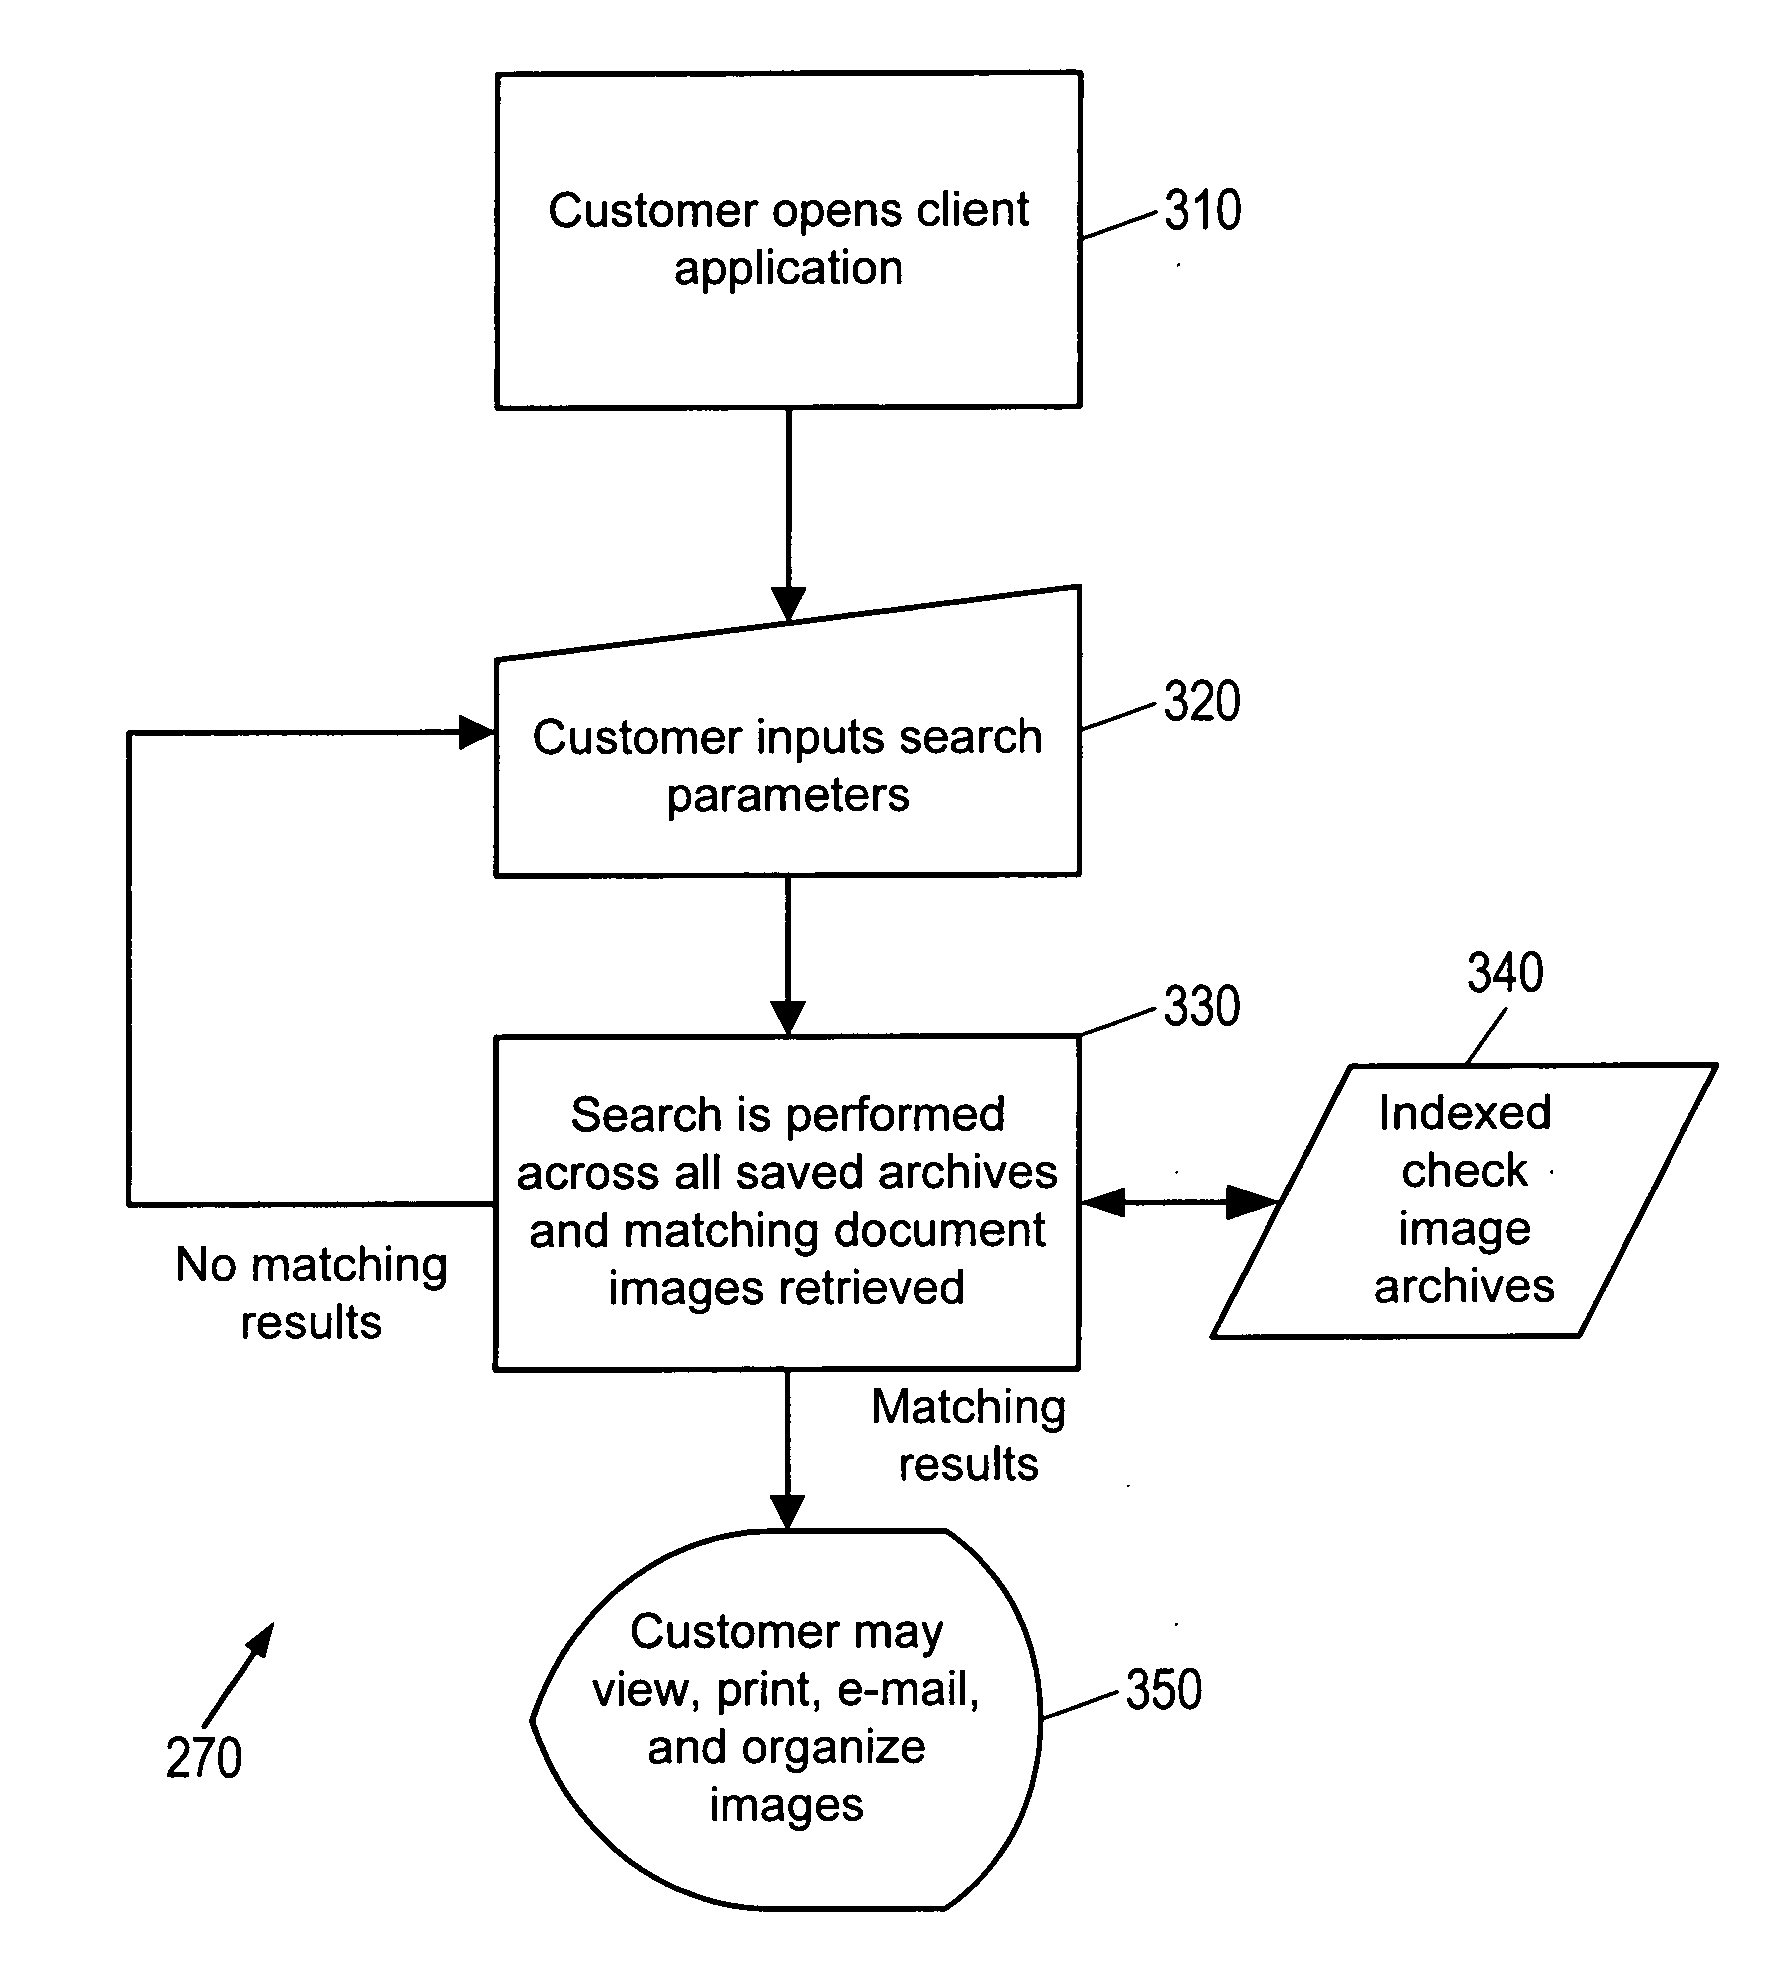 Financial Statement and Transaction Image Delivery and Access System